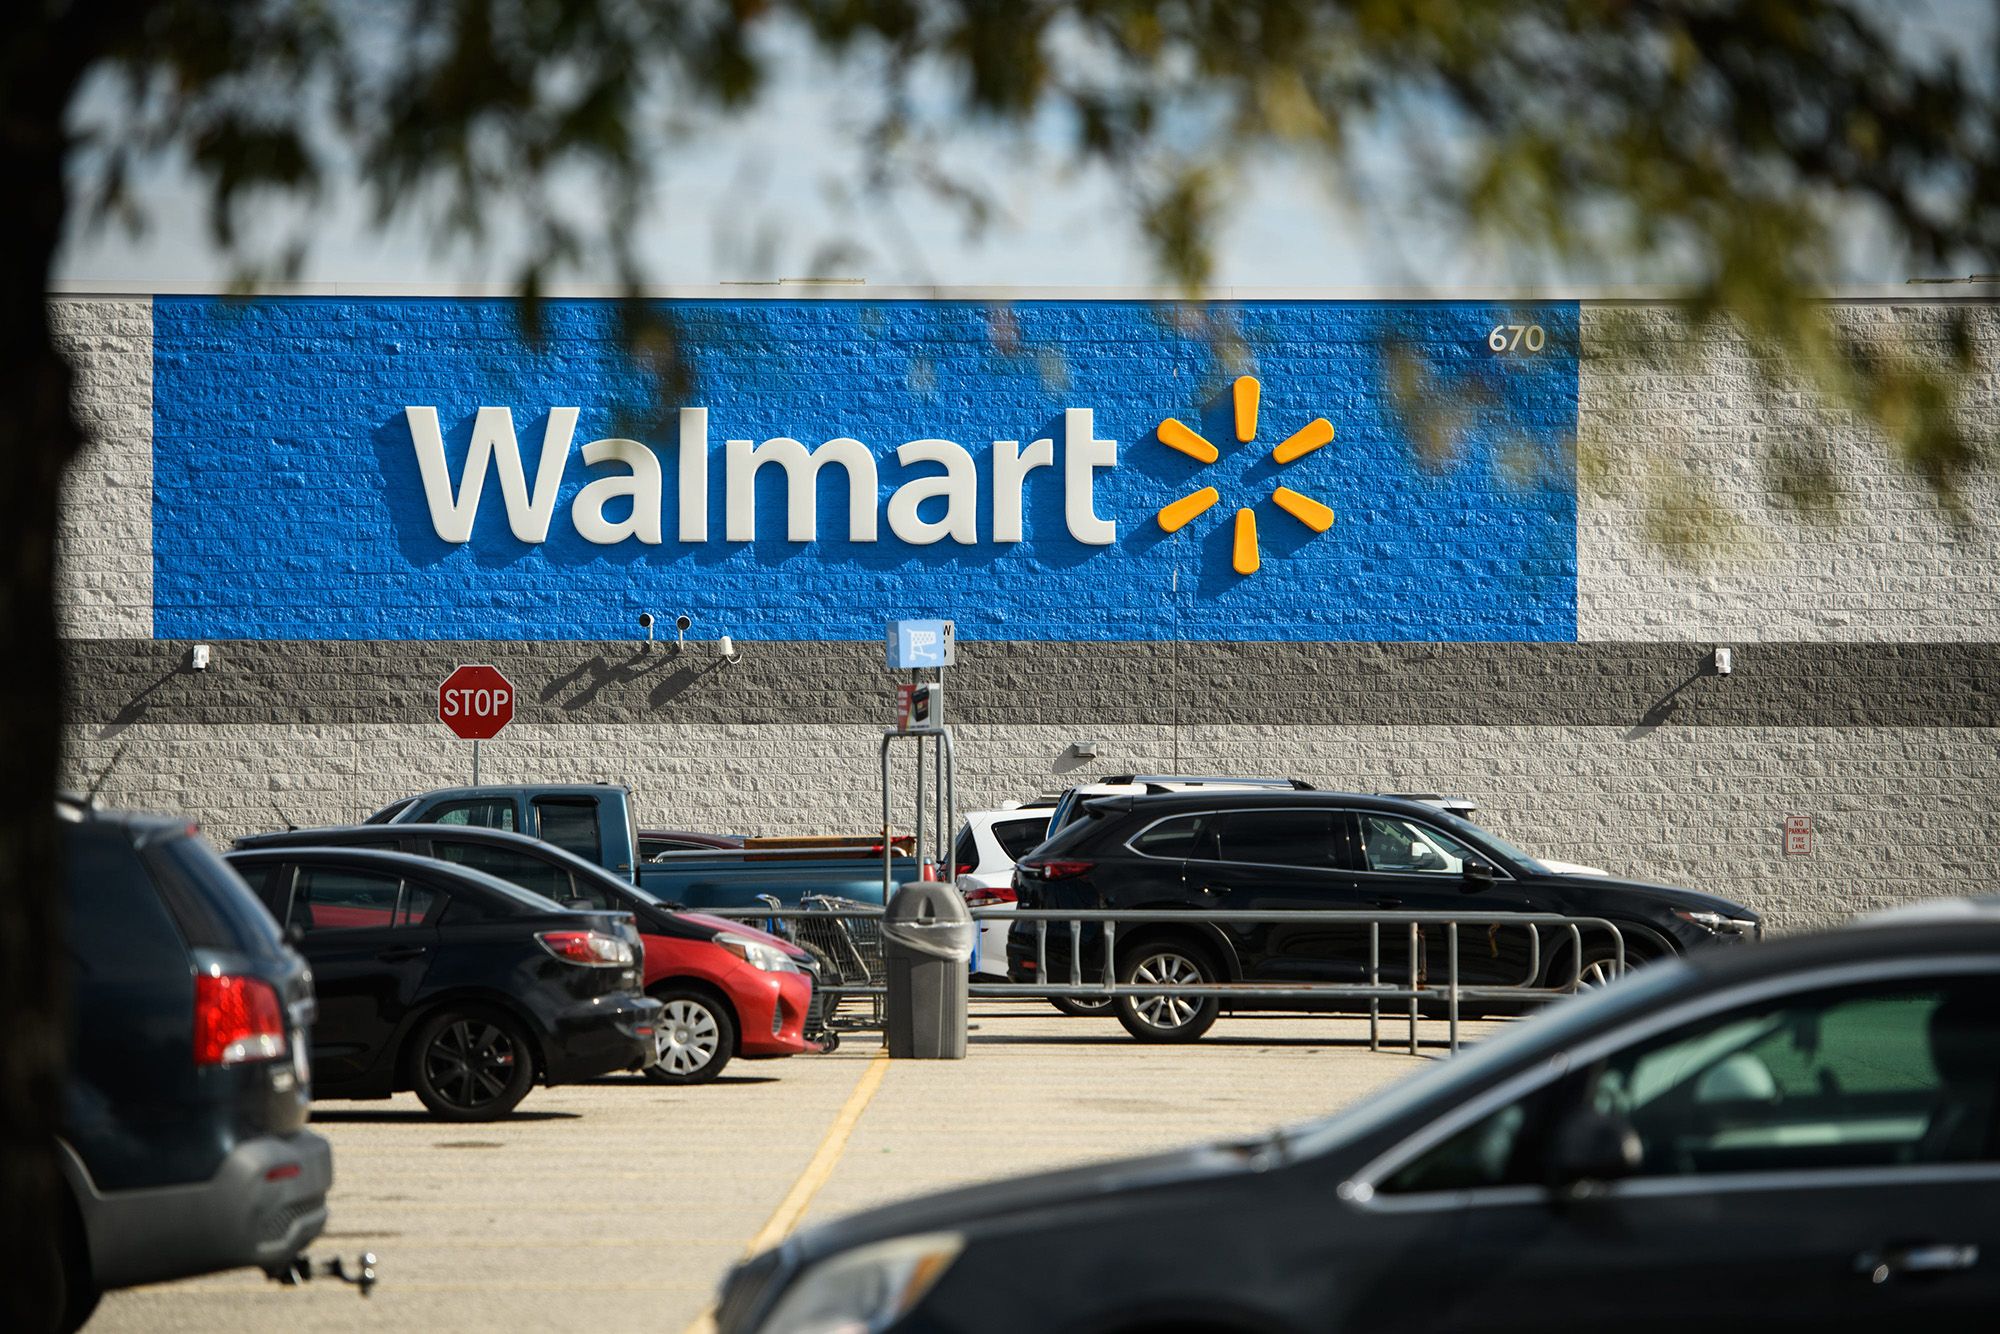 Walmart reaches $2 million settlement with Nevada for deceptive